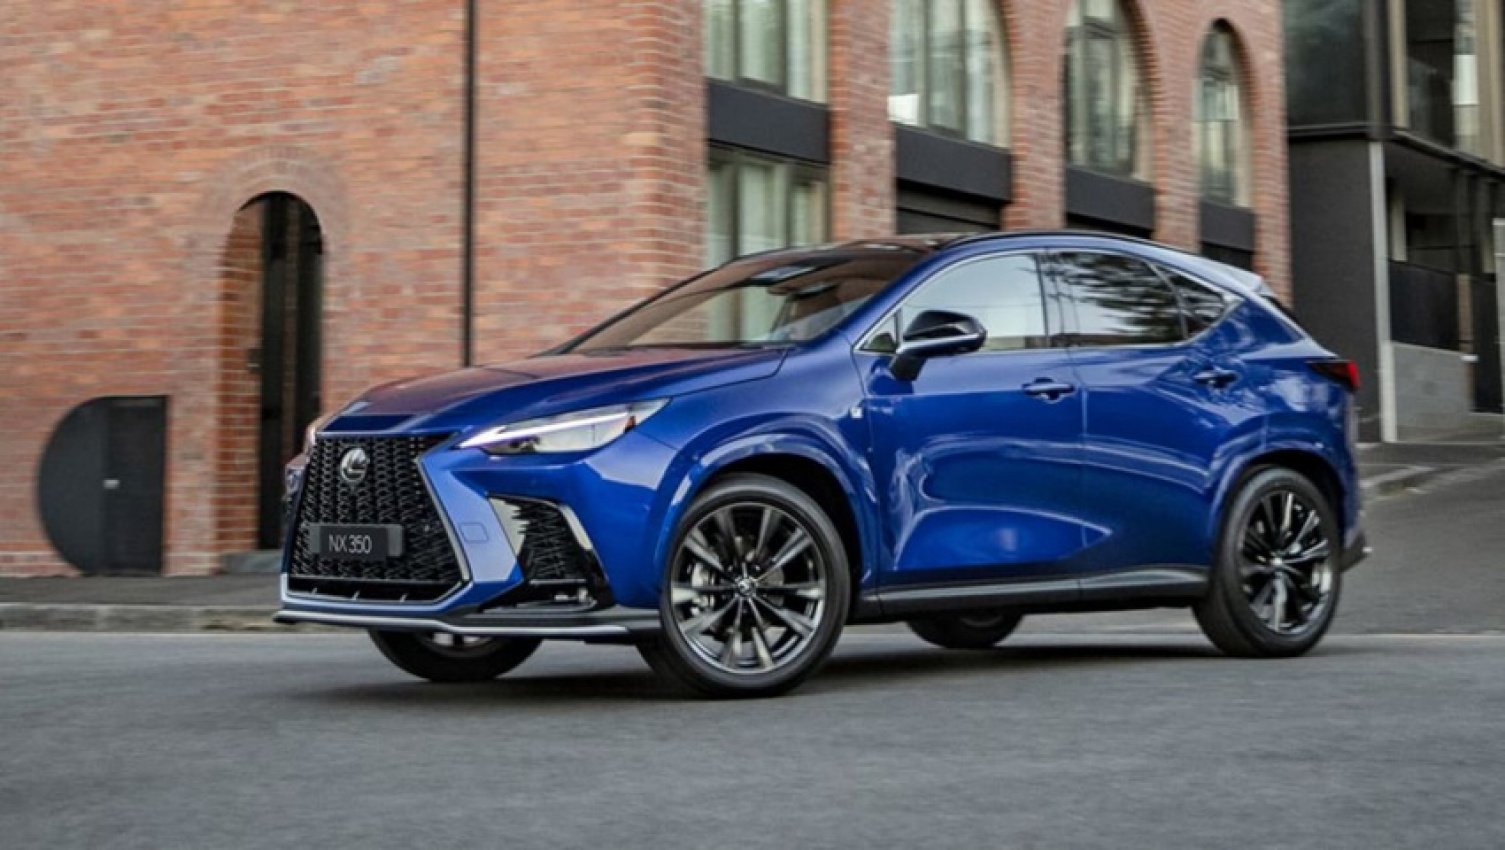 autos, bmw, cars, lexus, mercedes-benz, mg, toyota, bmw x3, family cars, green cars, hybrid cars, industry news, lexus news, lexus nx, lexus nx 2022, lexus suv range, mercedes, plug-in hybrid, prestige & luxury cars, toyota news, toyota rav4, toyota rav4 2022, toyota suv range, hot toyota gr rav4 inches closer: what lexus' plans for the mercedes amg glc 63 s and bmw x3 m-menacing nx f mean for australia's favourite suv